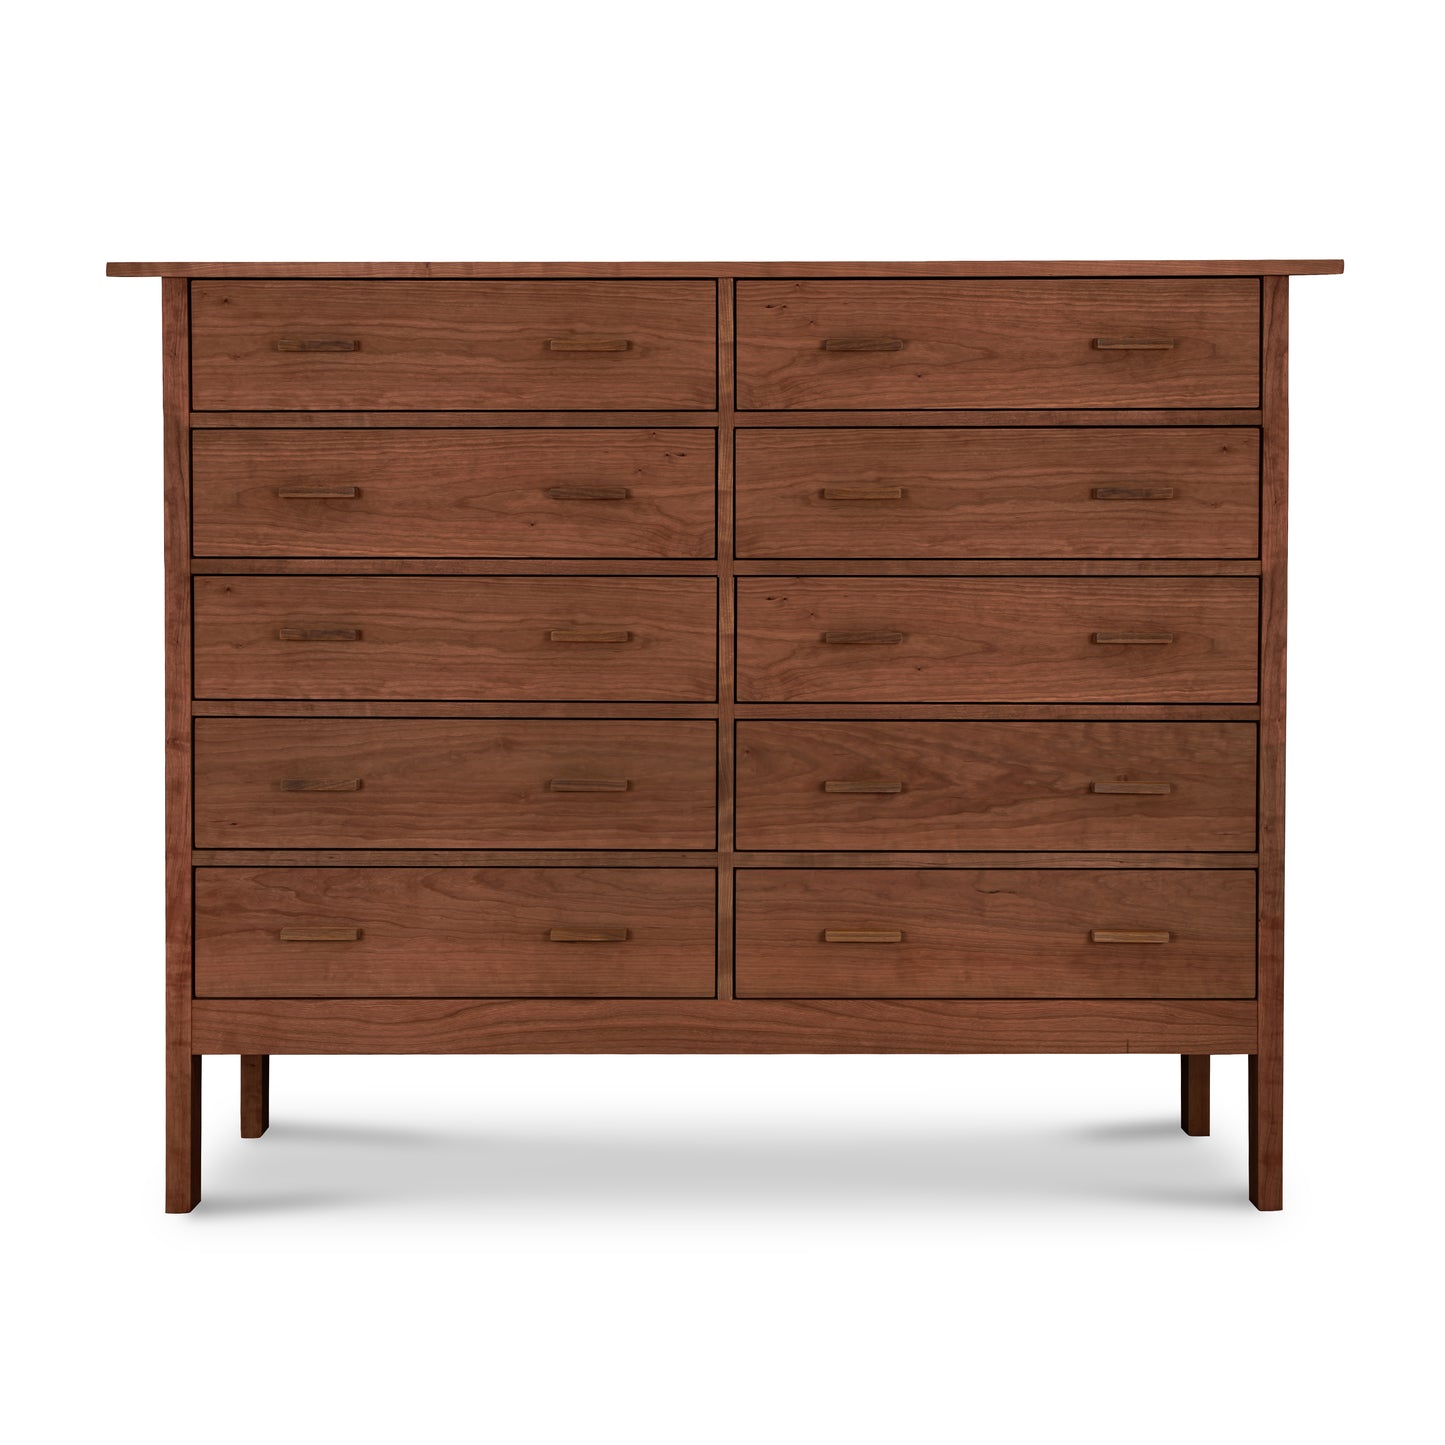 A Vermont Furniture Designs Modern Craftsman 10-Drawer Dresser, crafted from eco-friendly materials, with multiple drawers, isolated on a white background.